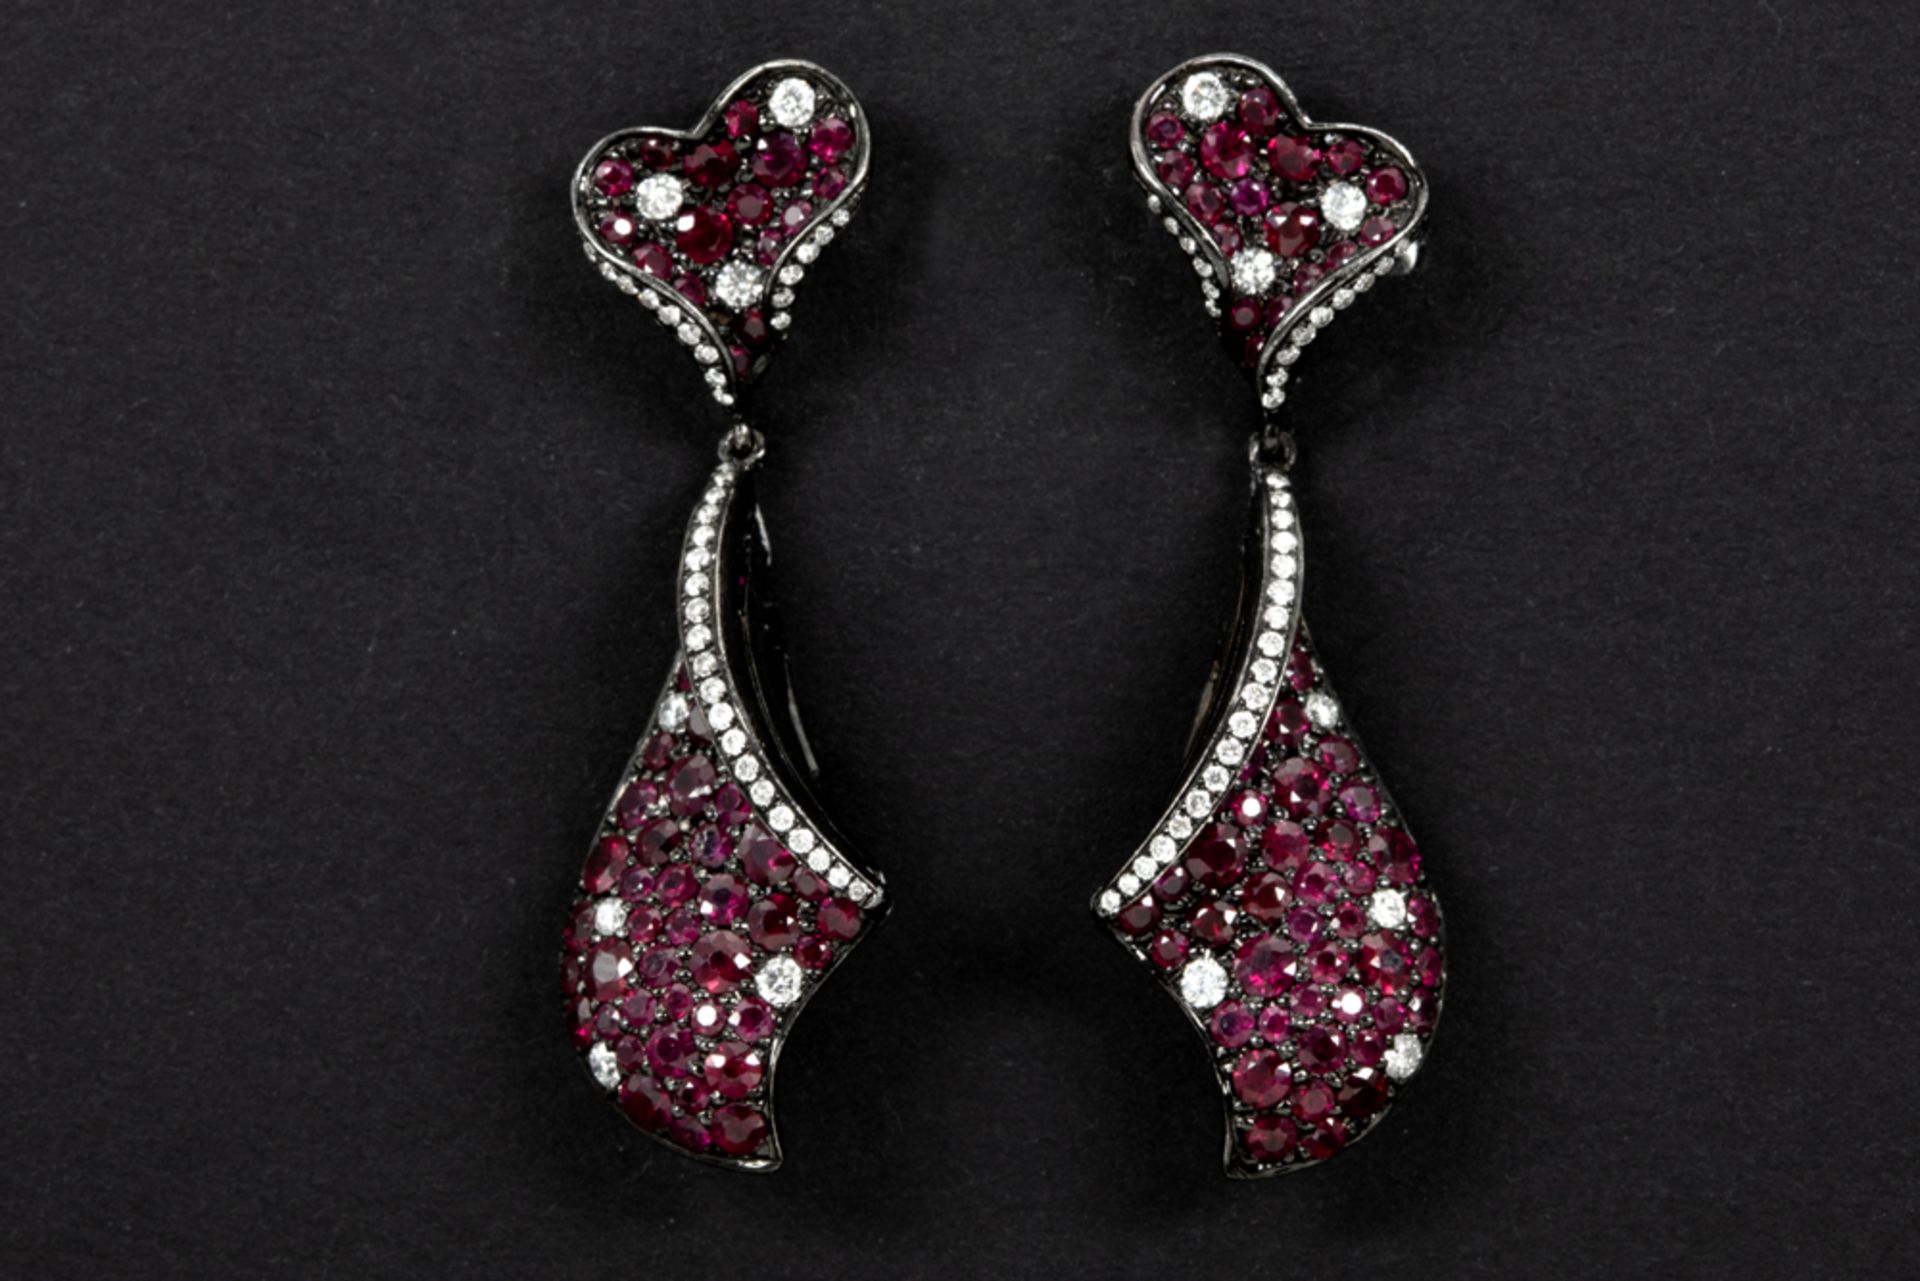 pair of earrings with a special design with fan-shaped pendant in "ebonised" white gold (18 carat)